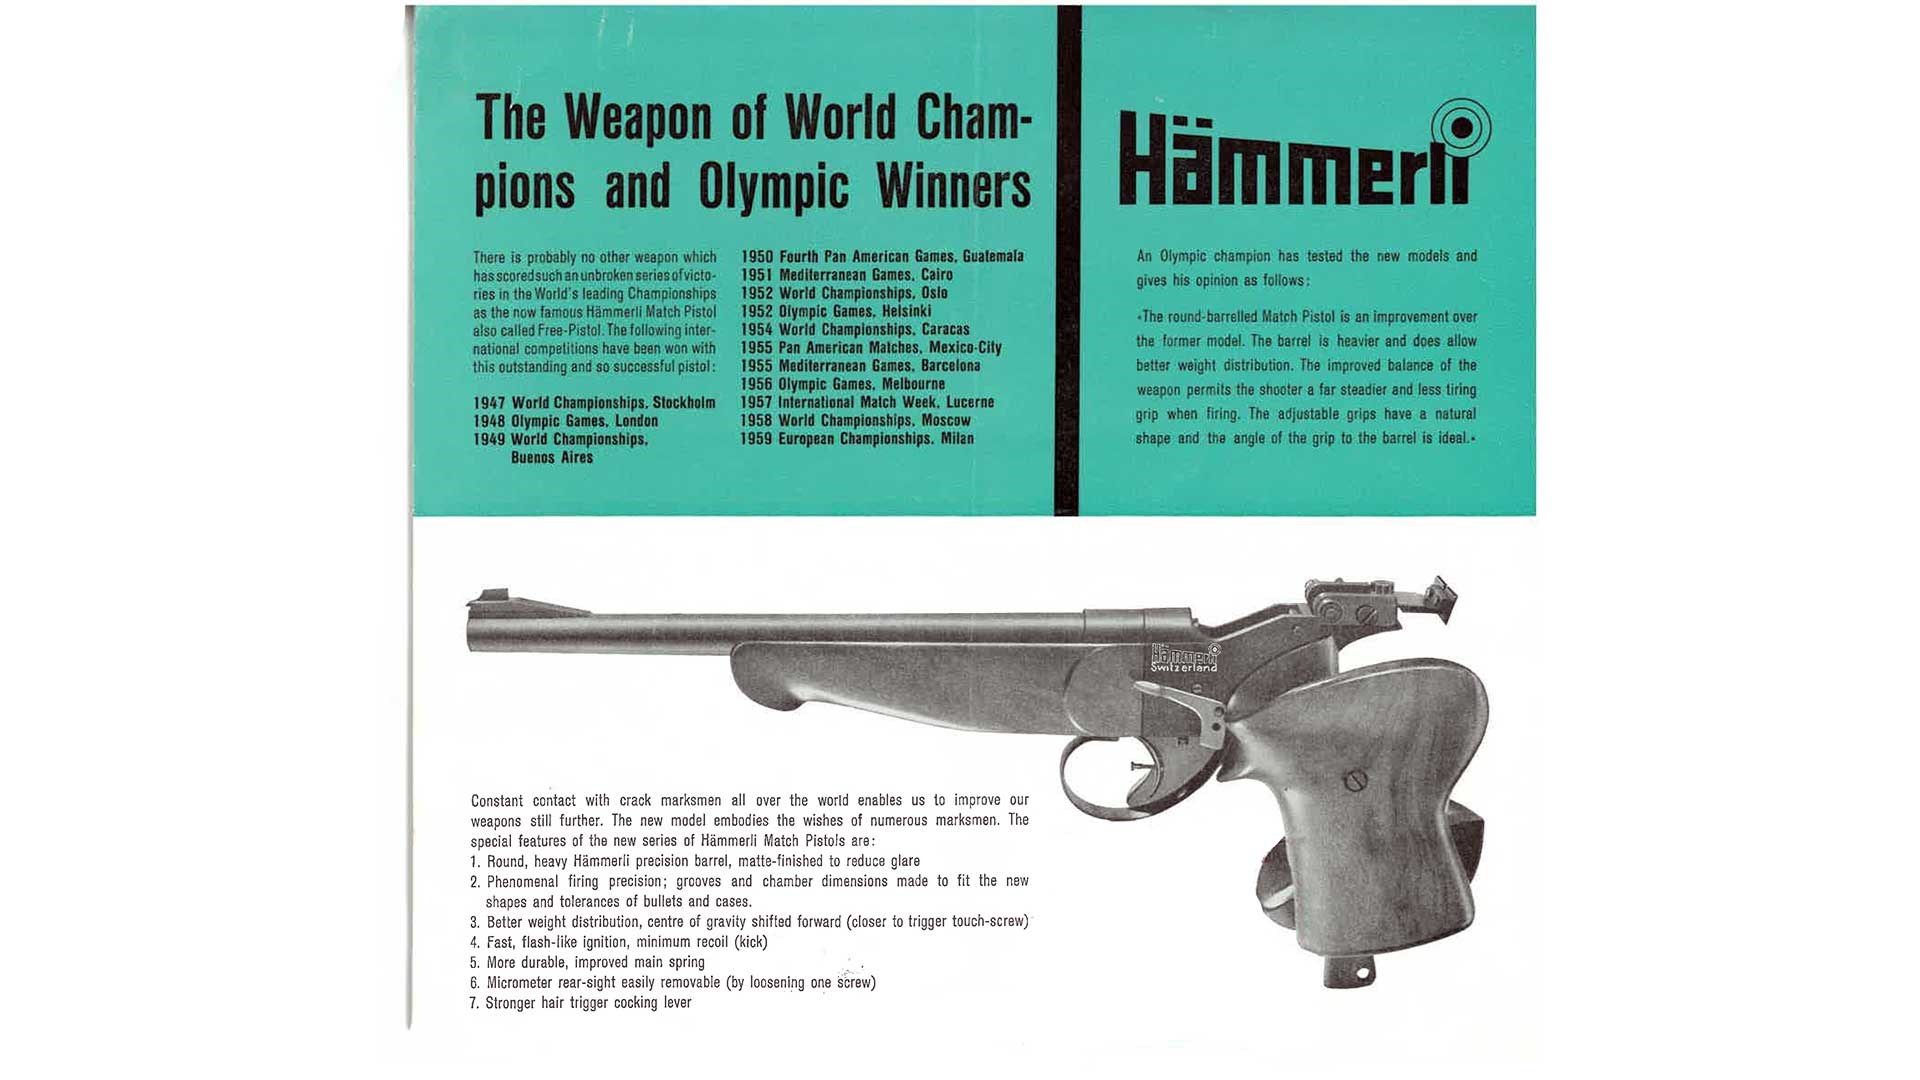 Left side of the Hammerli MP 33, also known as the Model 100.